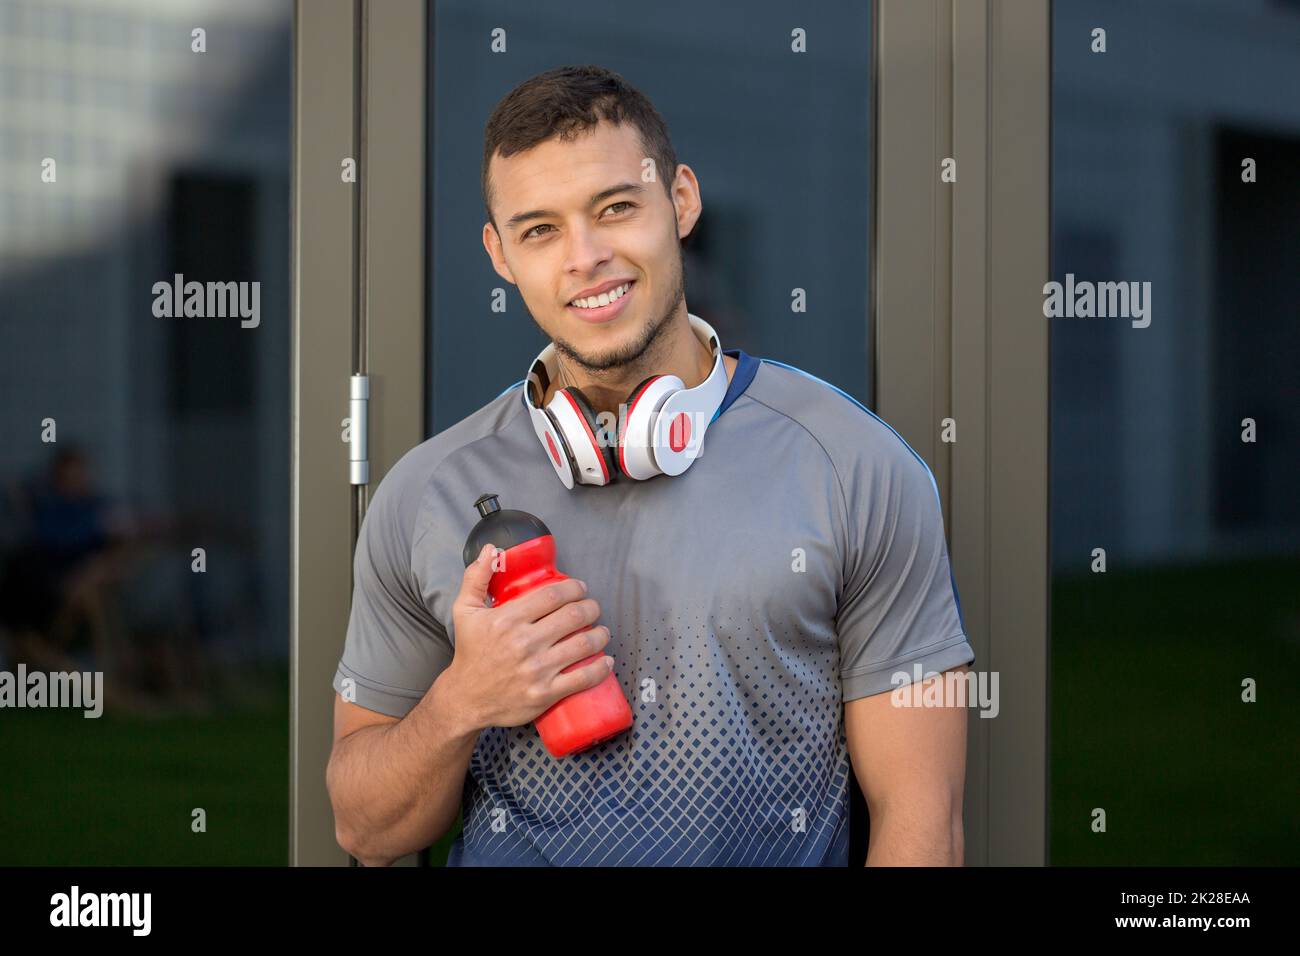 Smiling young latin man looking up runner outdoor sports fitness training Stock Photo